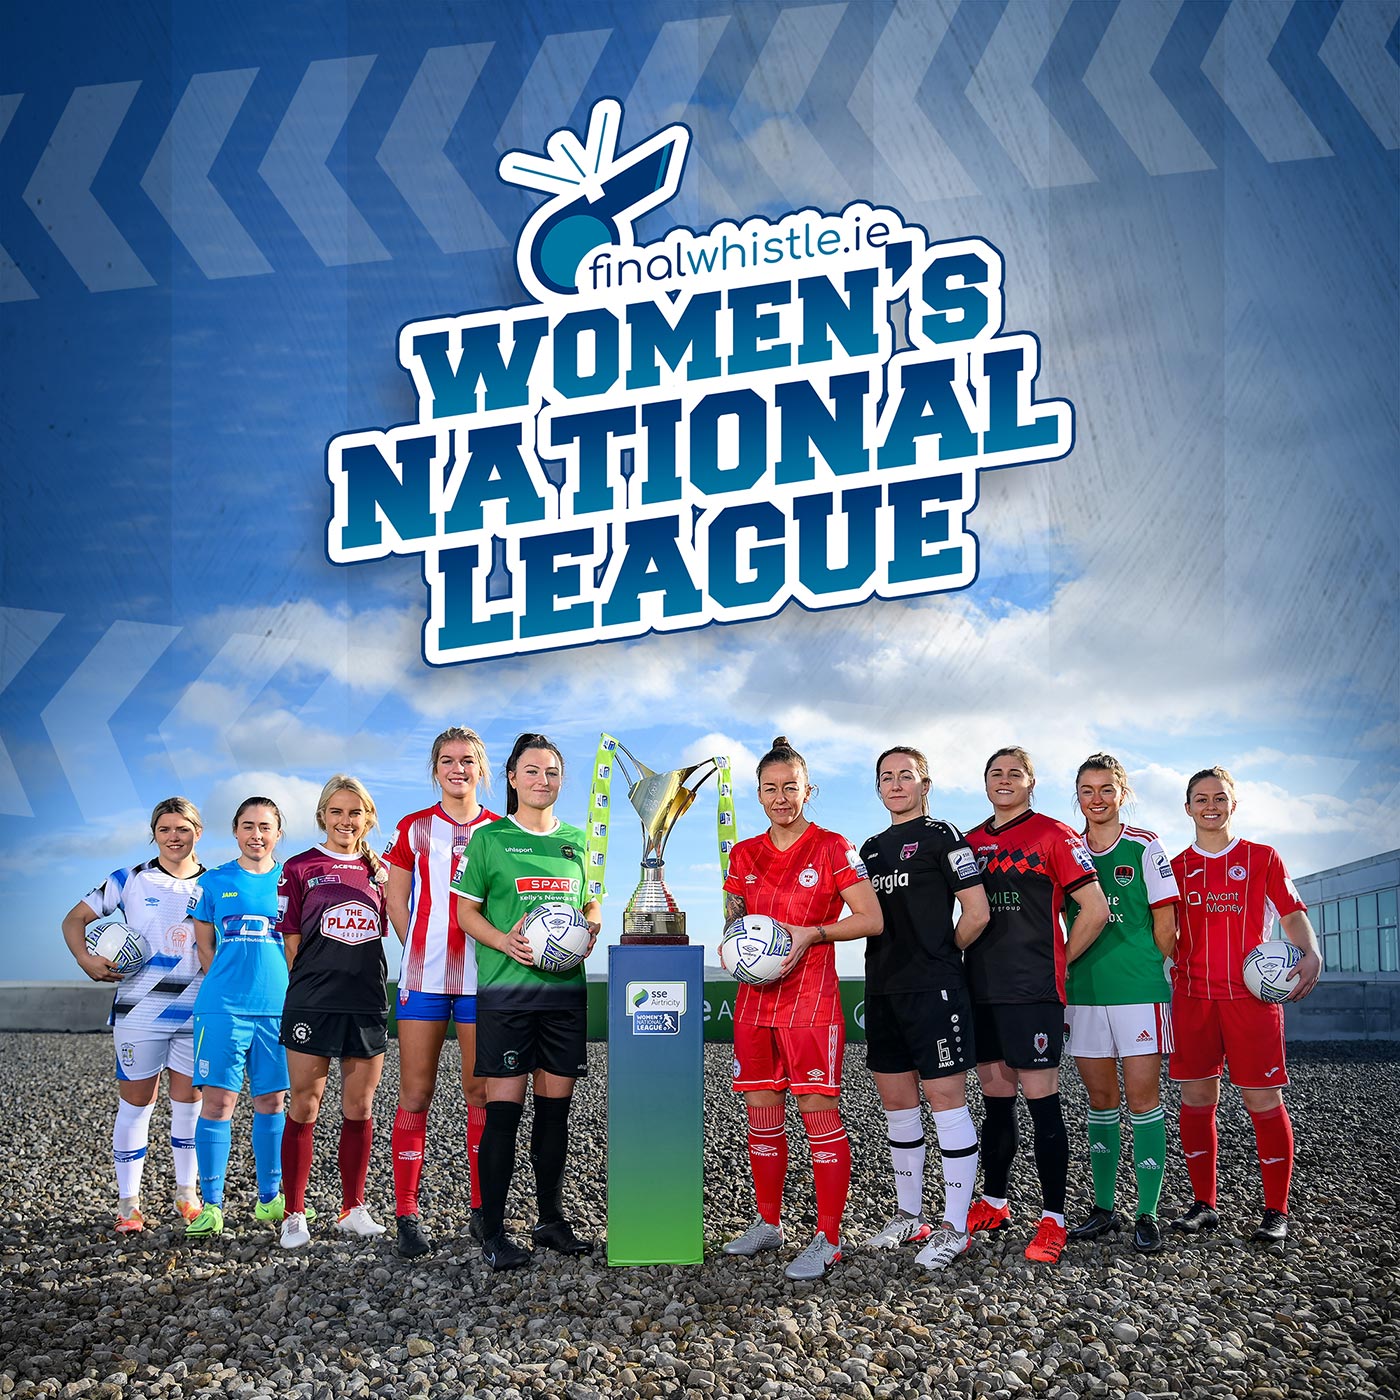 Artwork for Final Whistle Women's National League